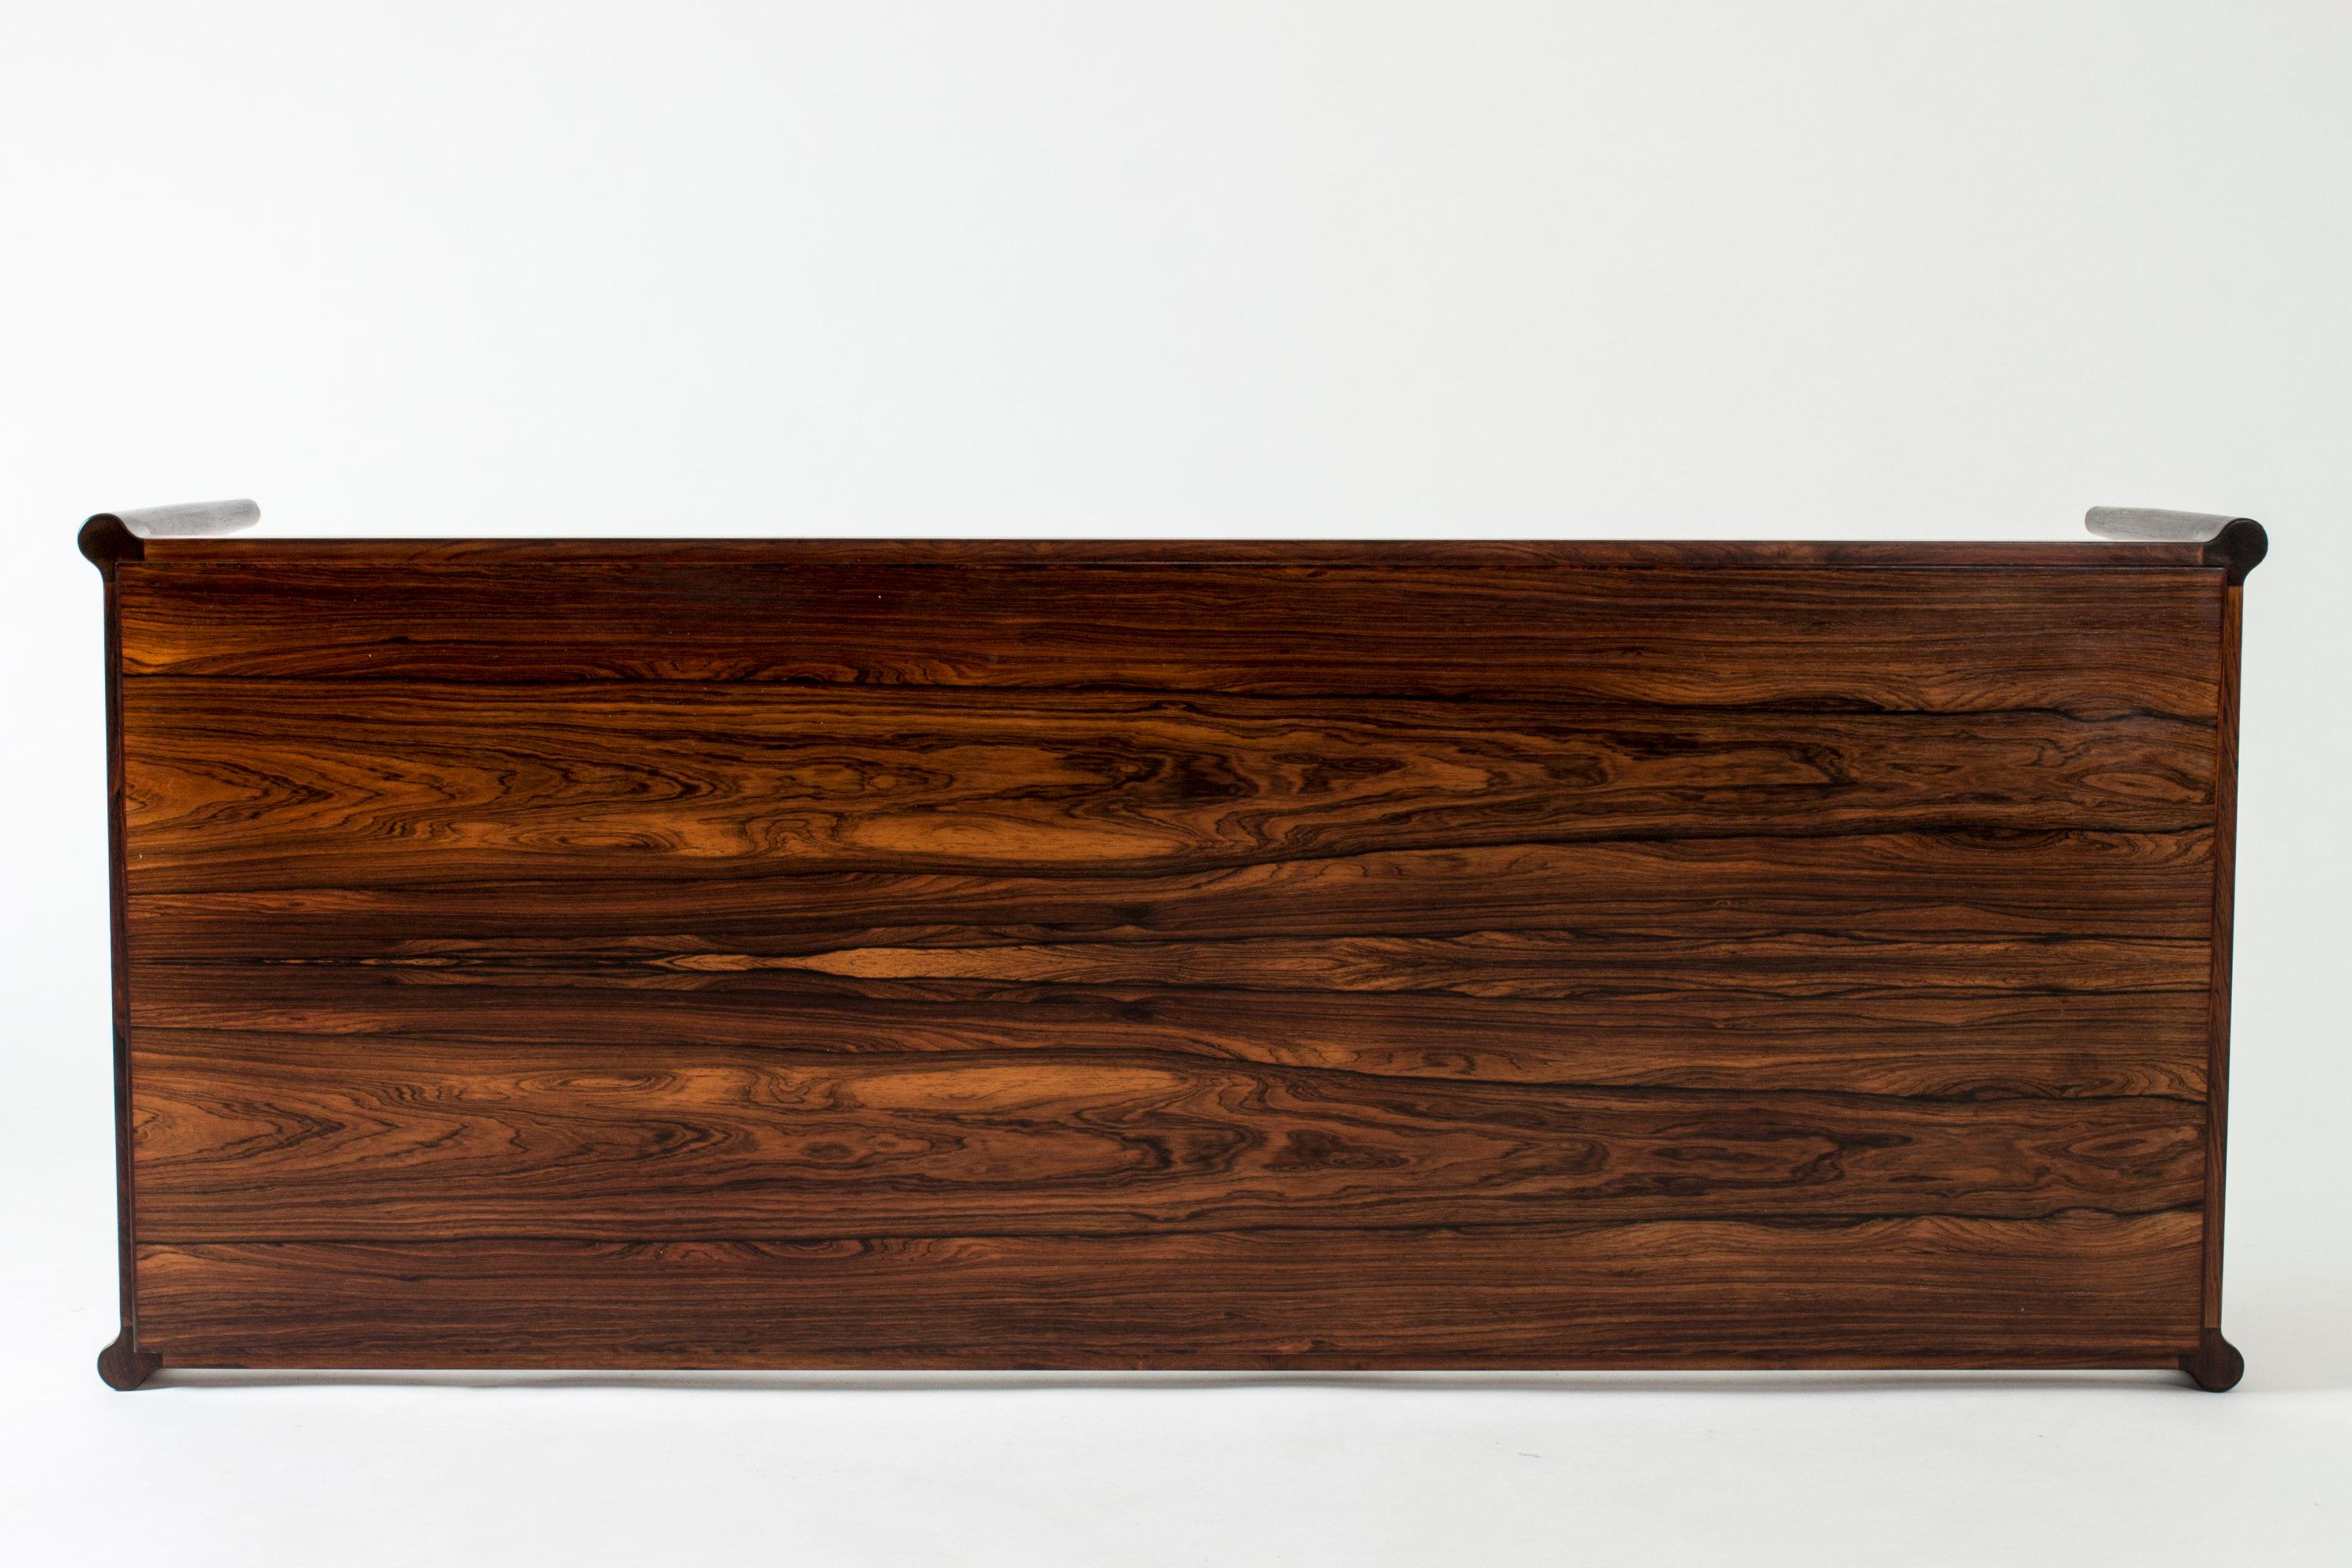 Scandinavian Modern Rosewood Coffee Table by Ib Kofod-Larson for Seffle Möller, Sweden, 1960s For Sale